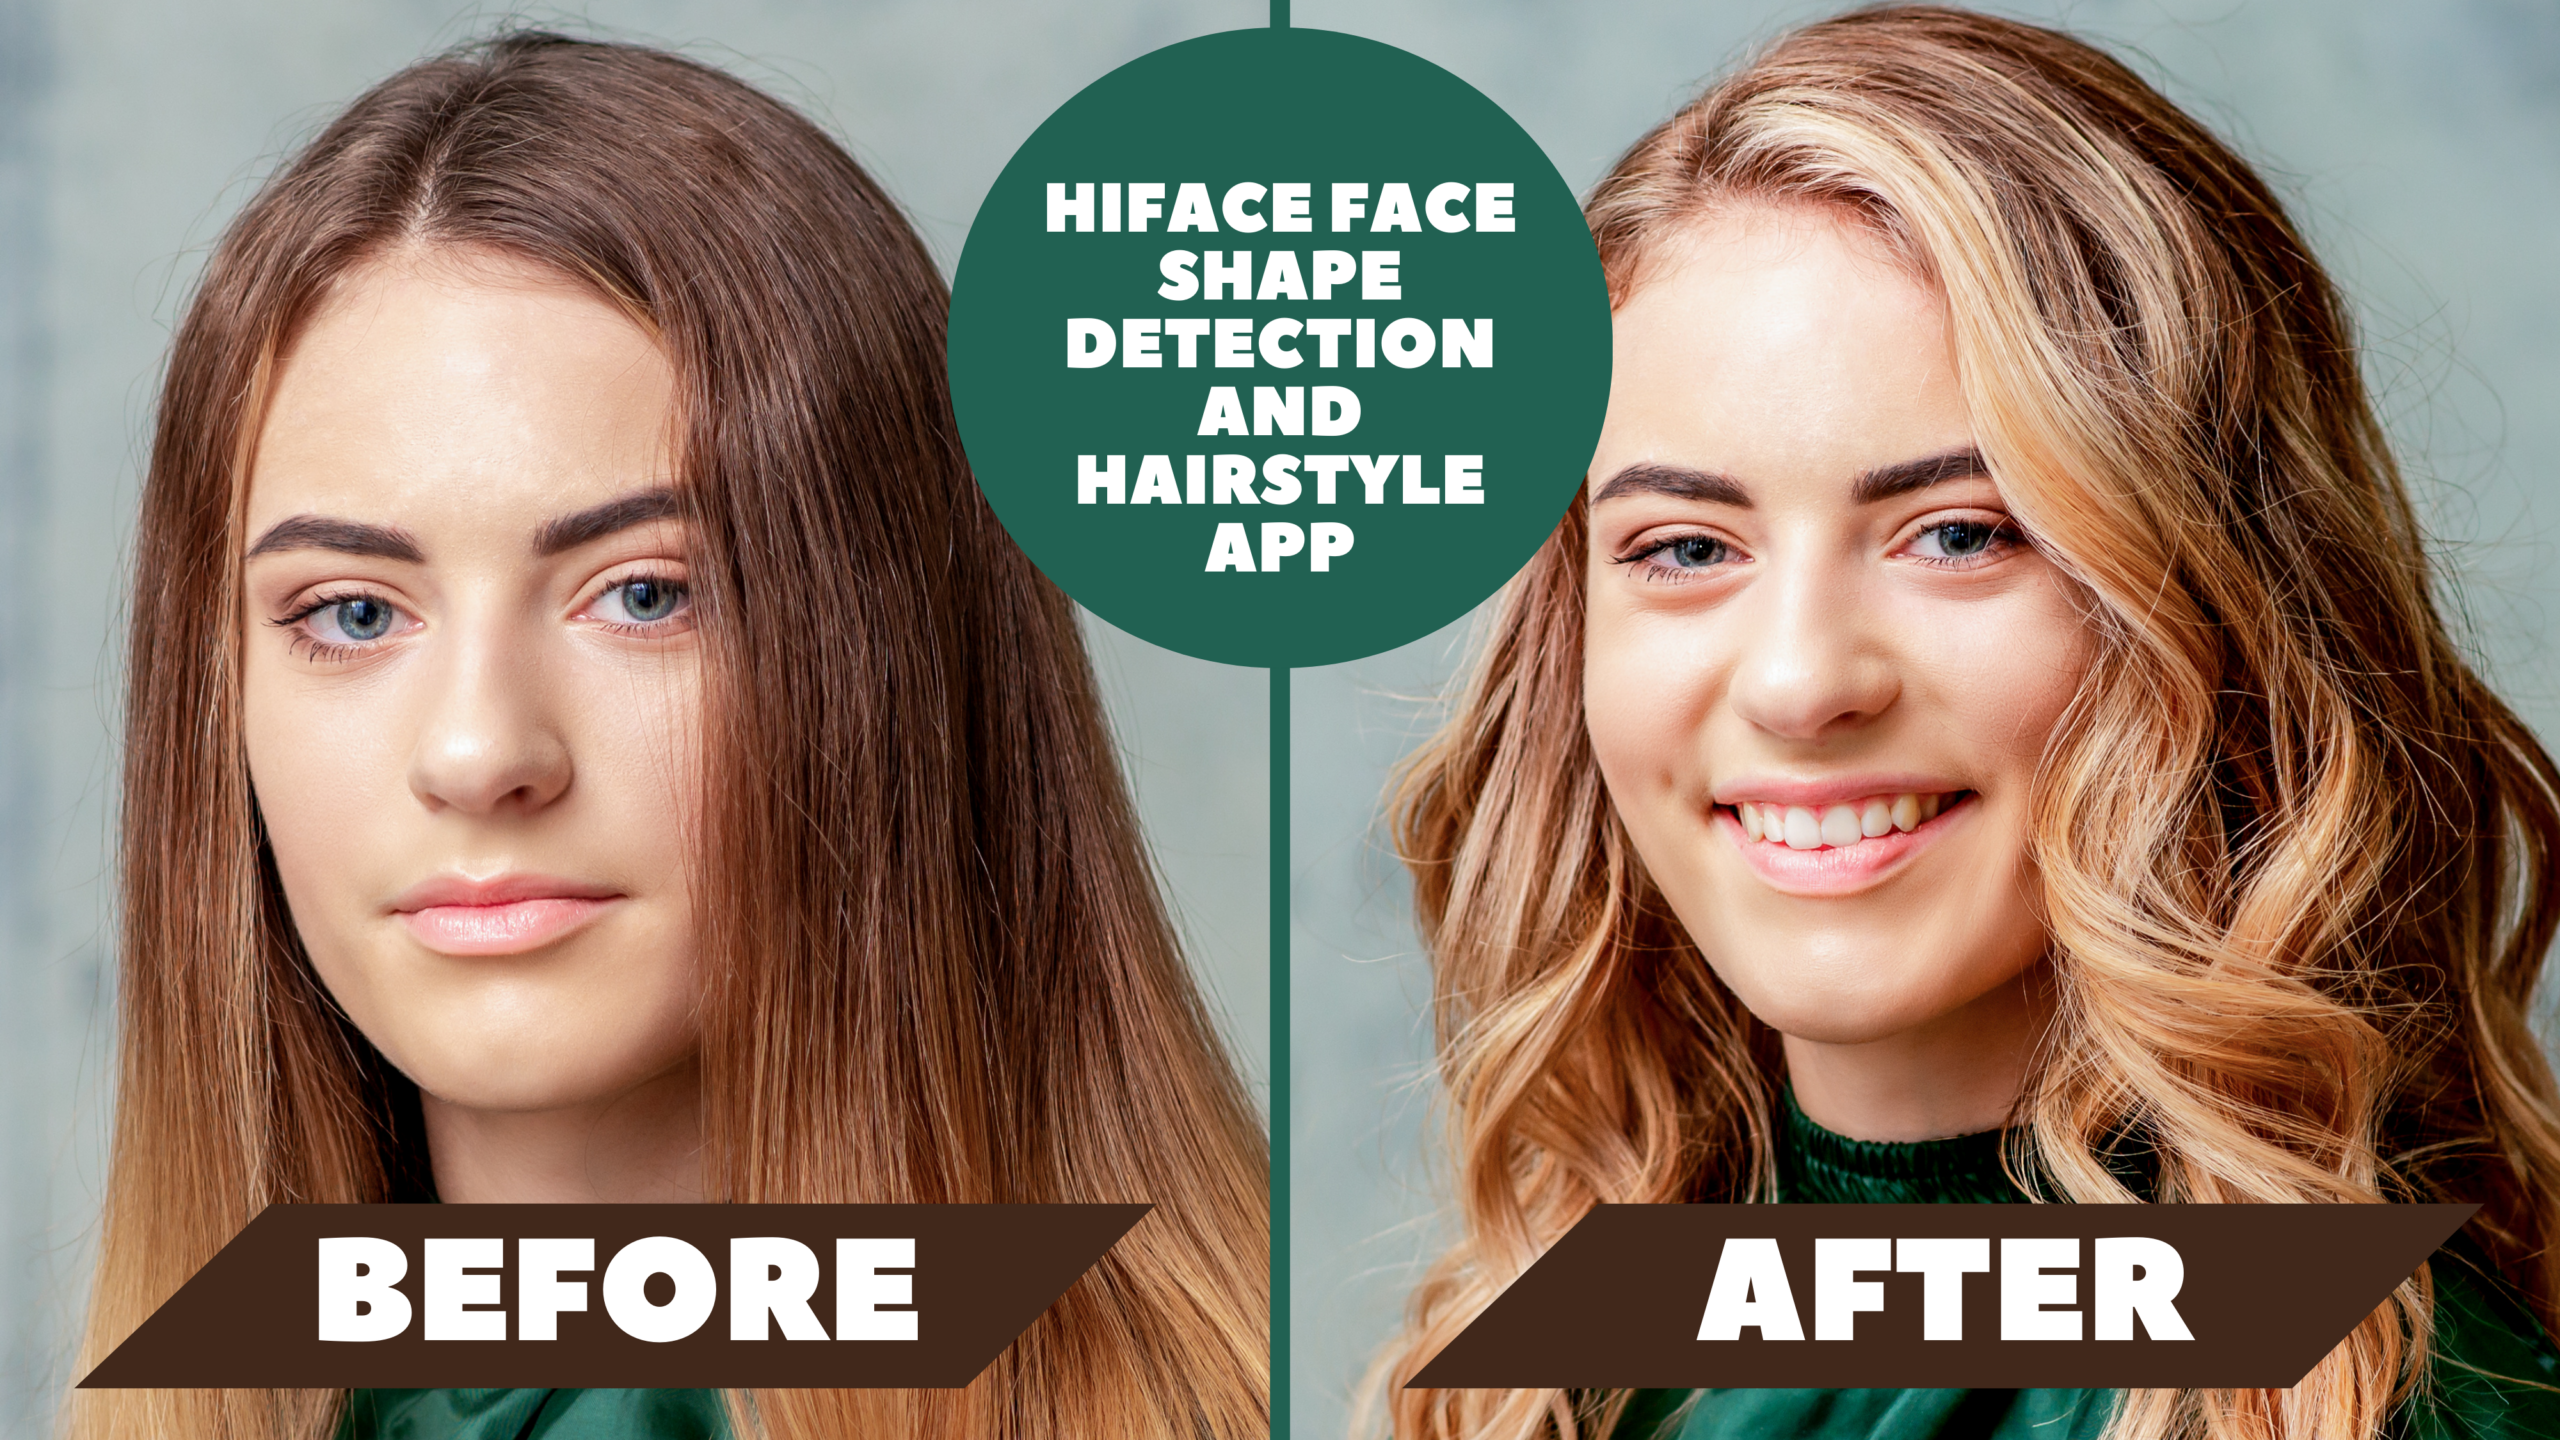 HiFace Face Shape Detection and Hairstyle App